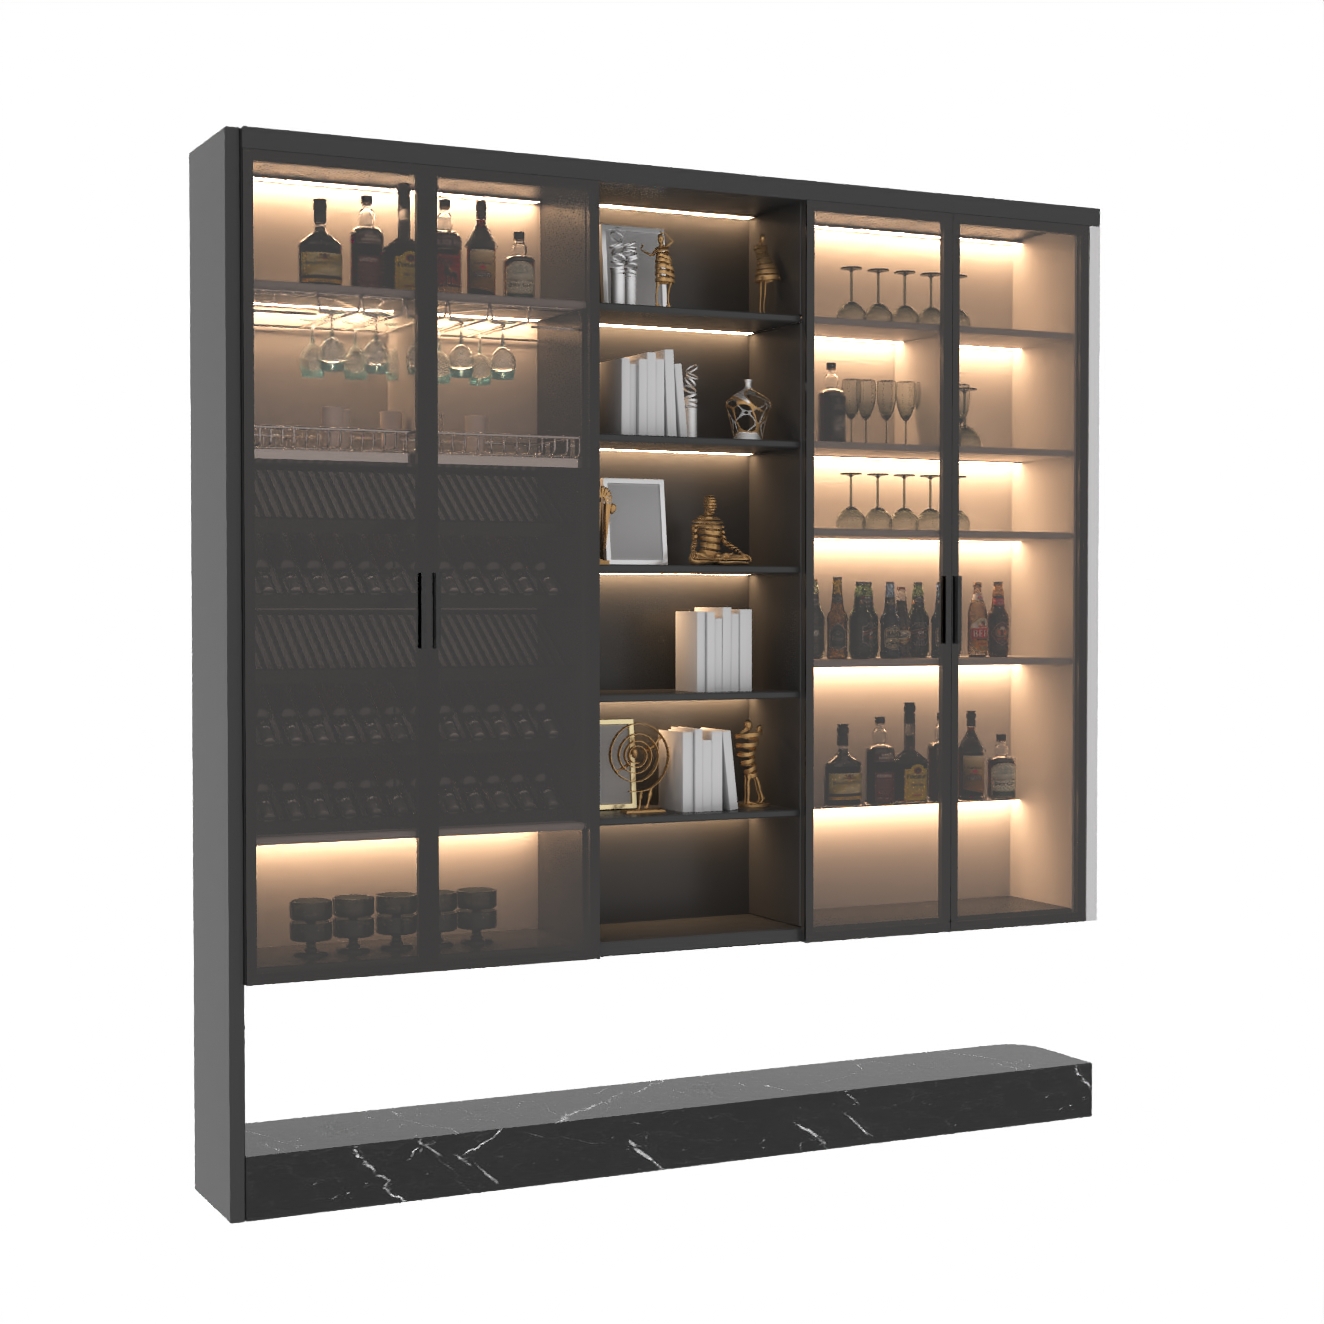 10509. Download Free Wine Cabinet Model By Ha My